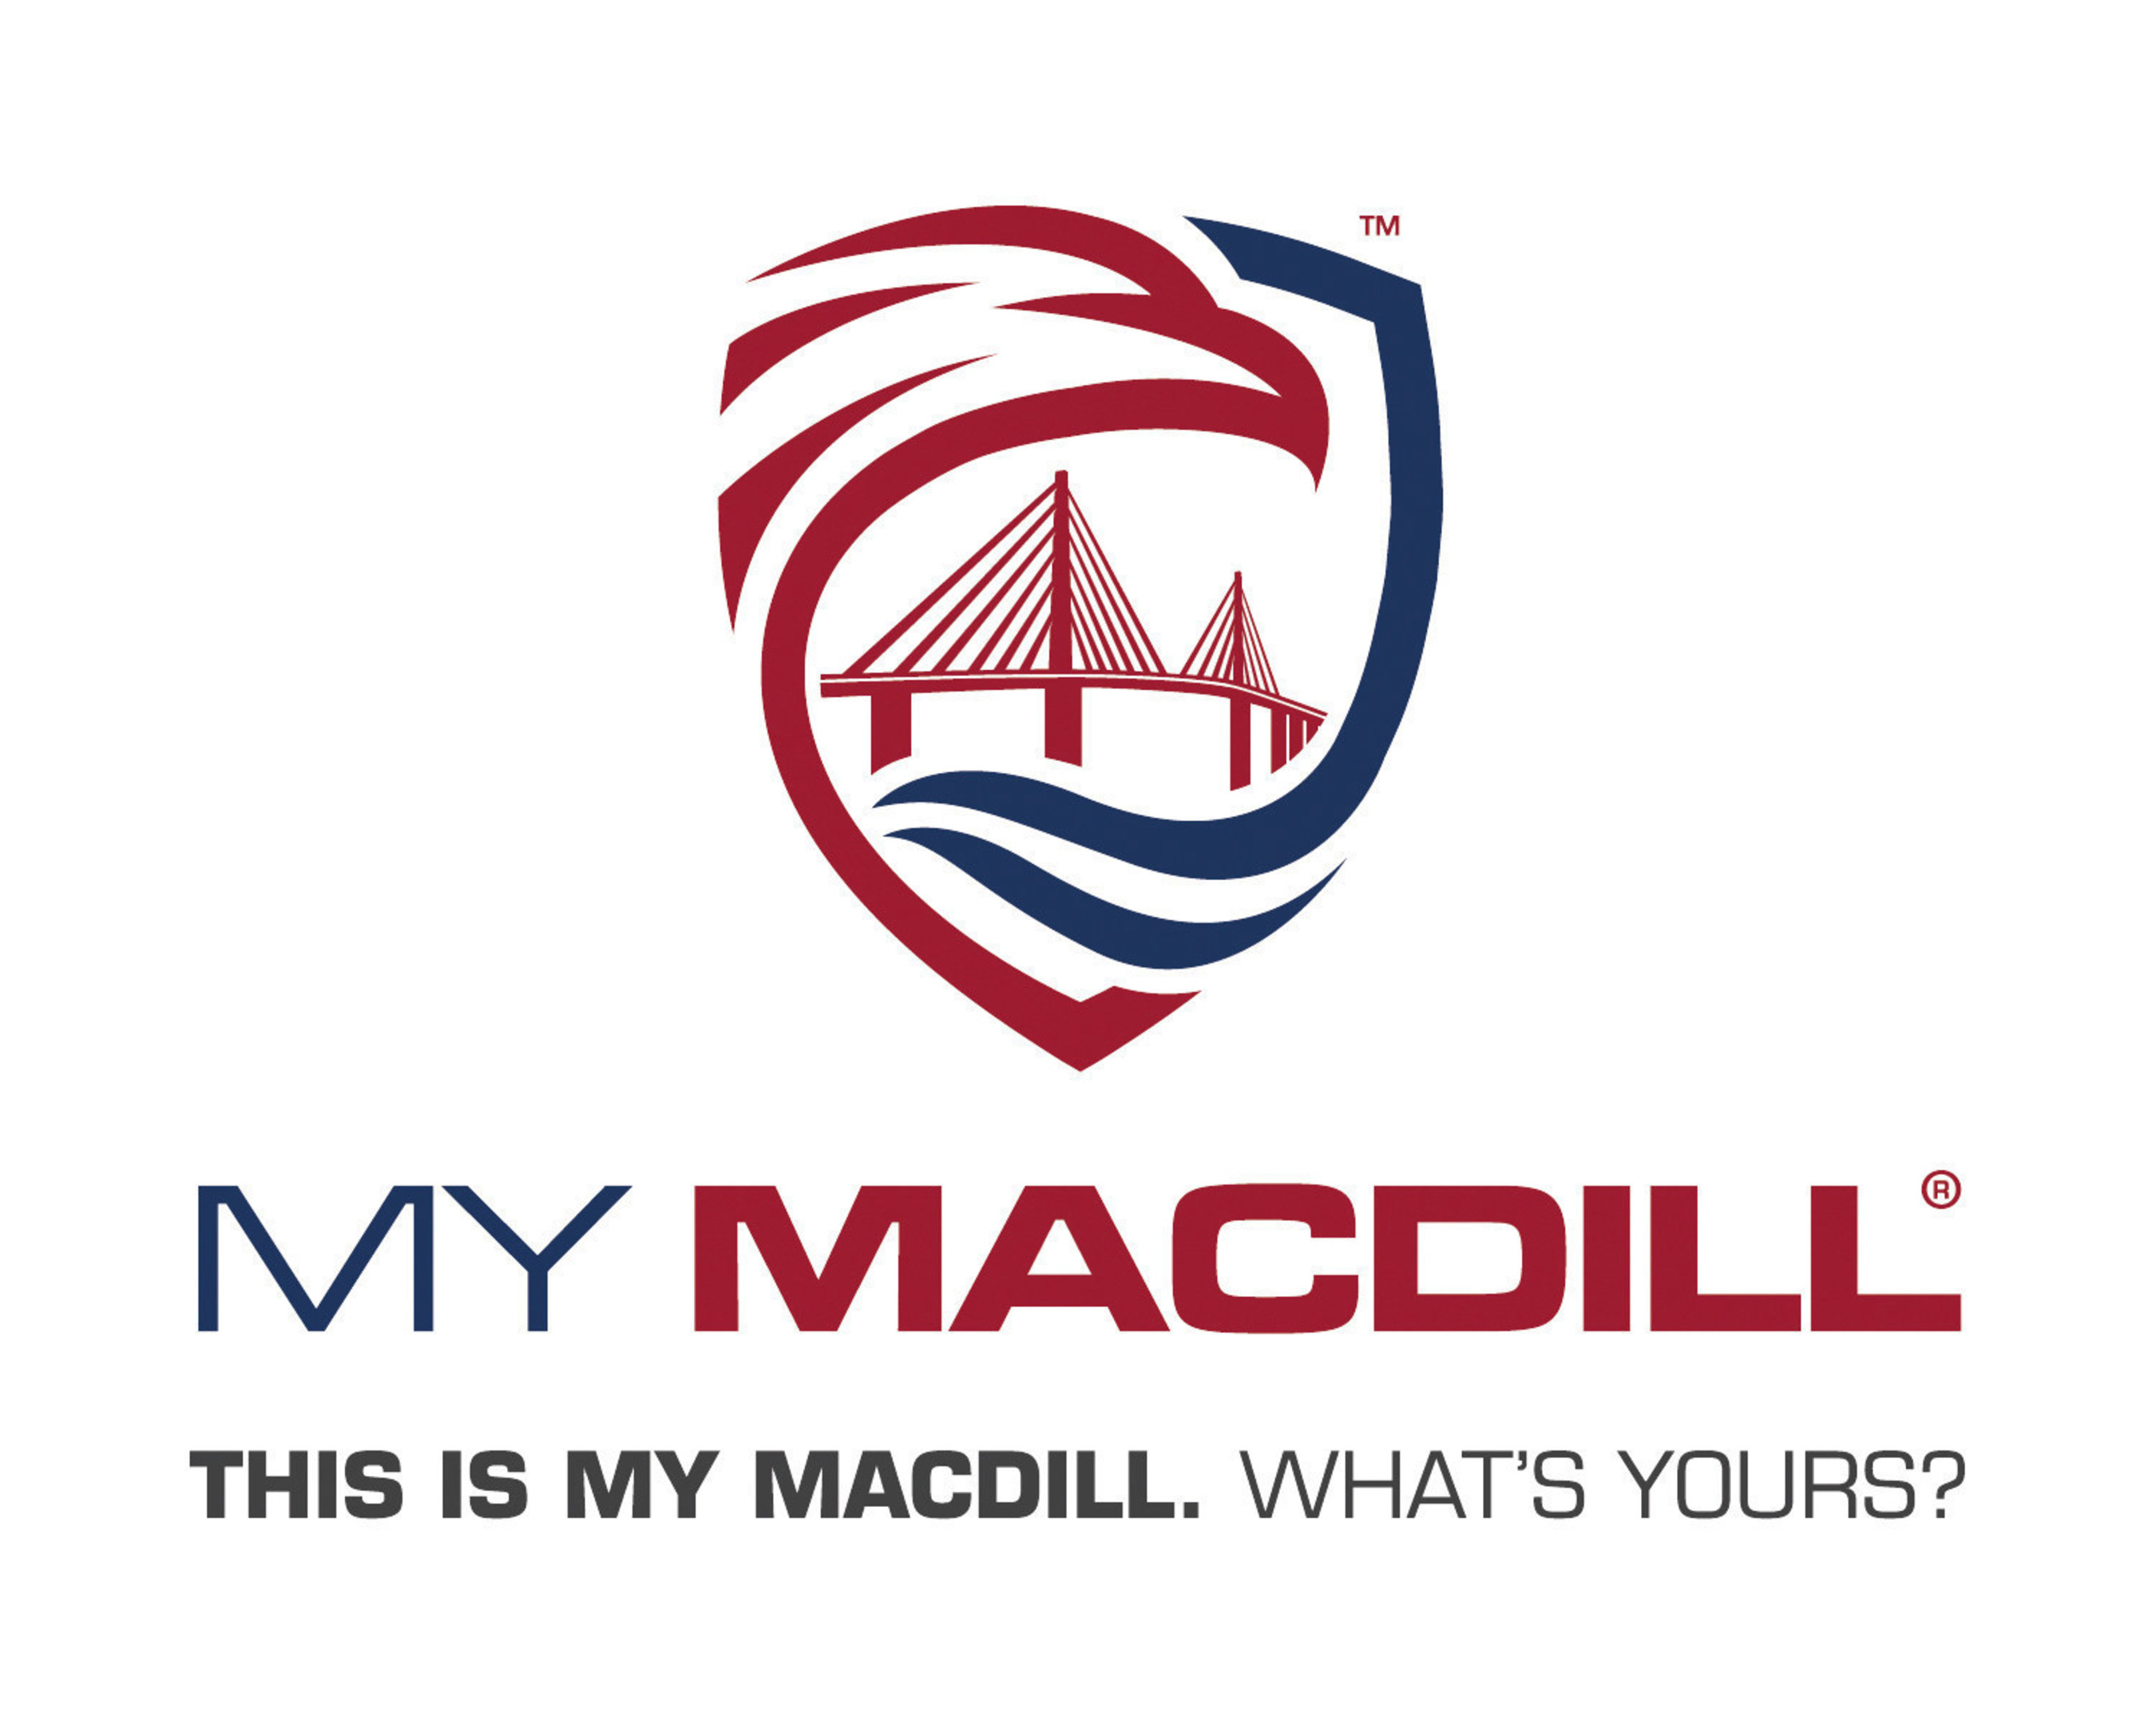 "This is My MacDill. What's Yours?"